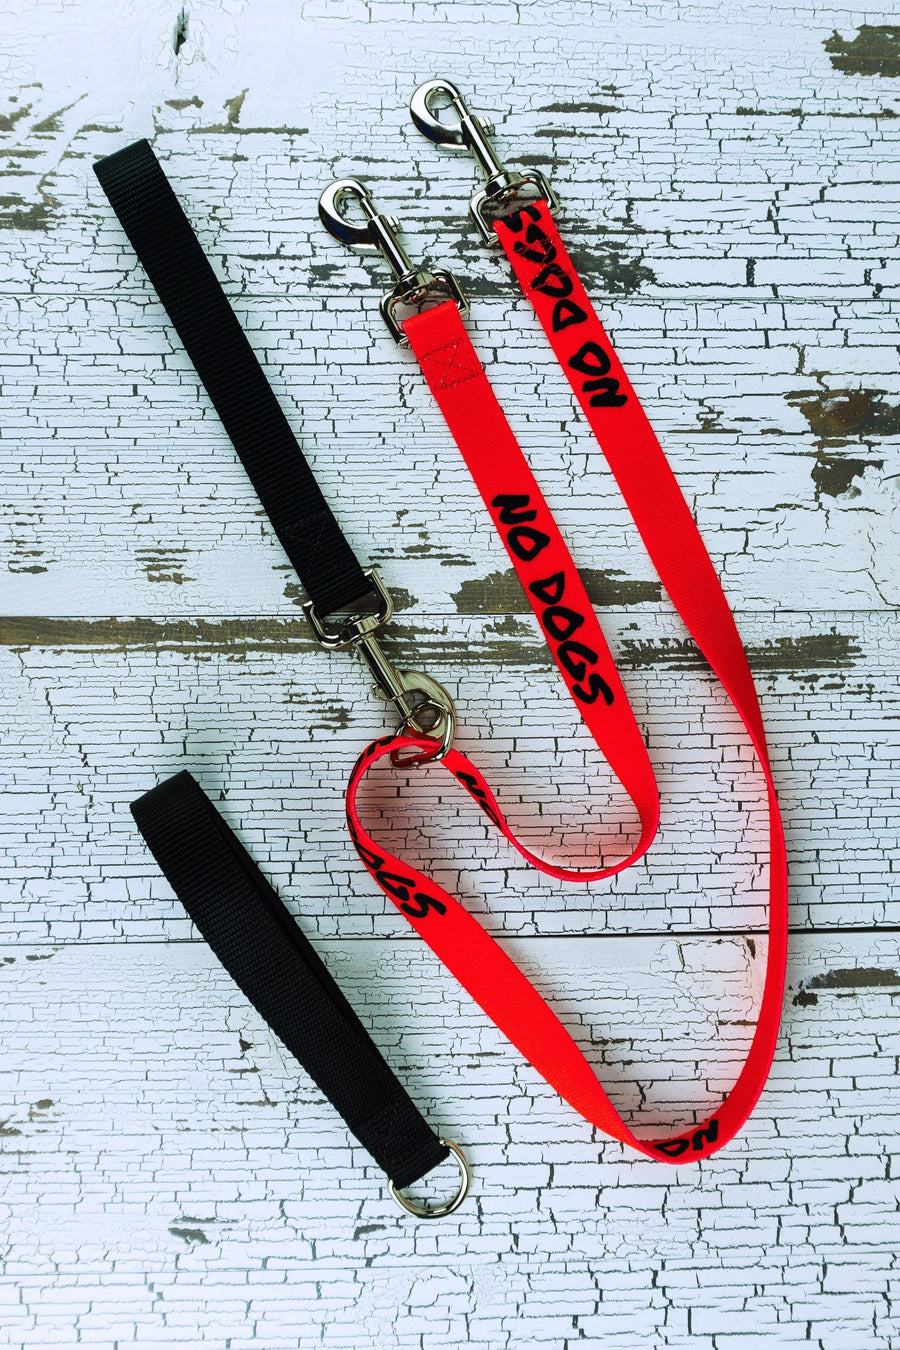 The no pull leash is shown here with the safety message no dogs on red webbing with the snap bolt handle connected to the floating d ring of this fixed length leash.